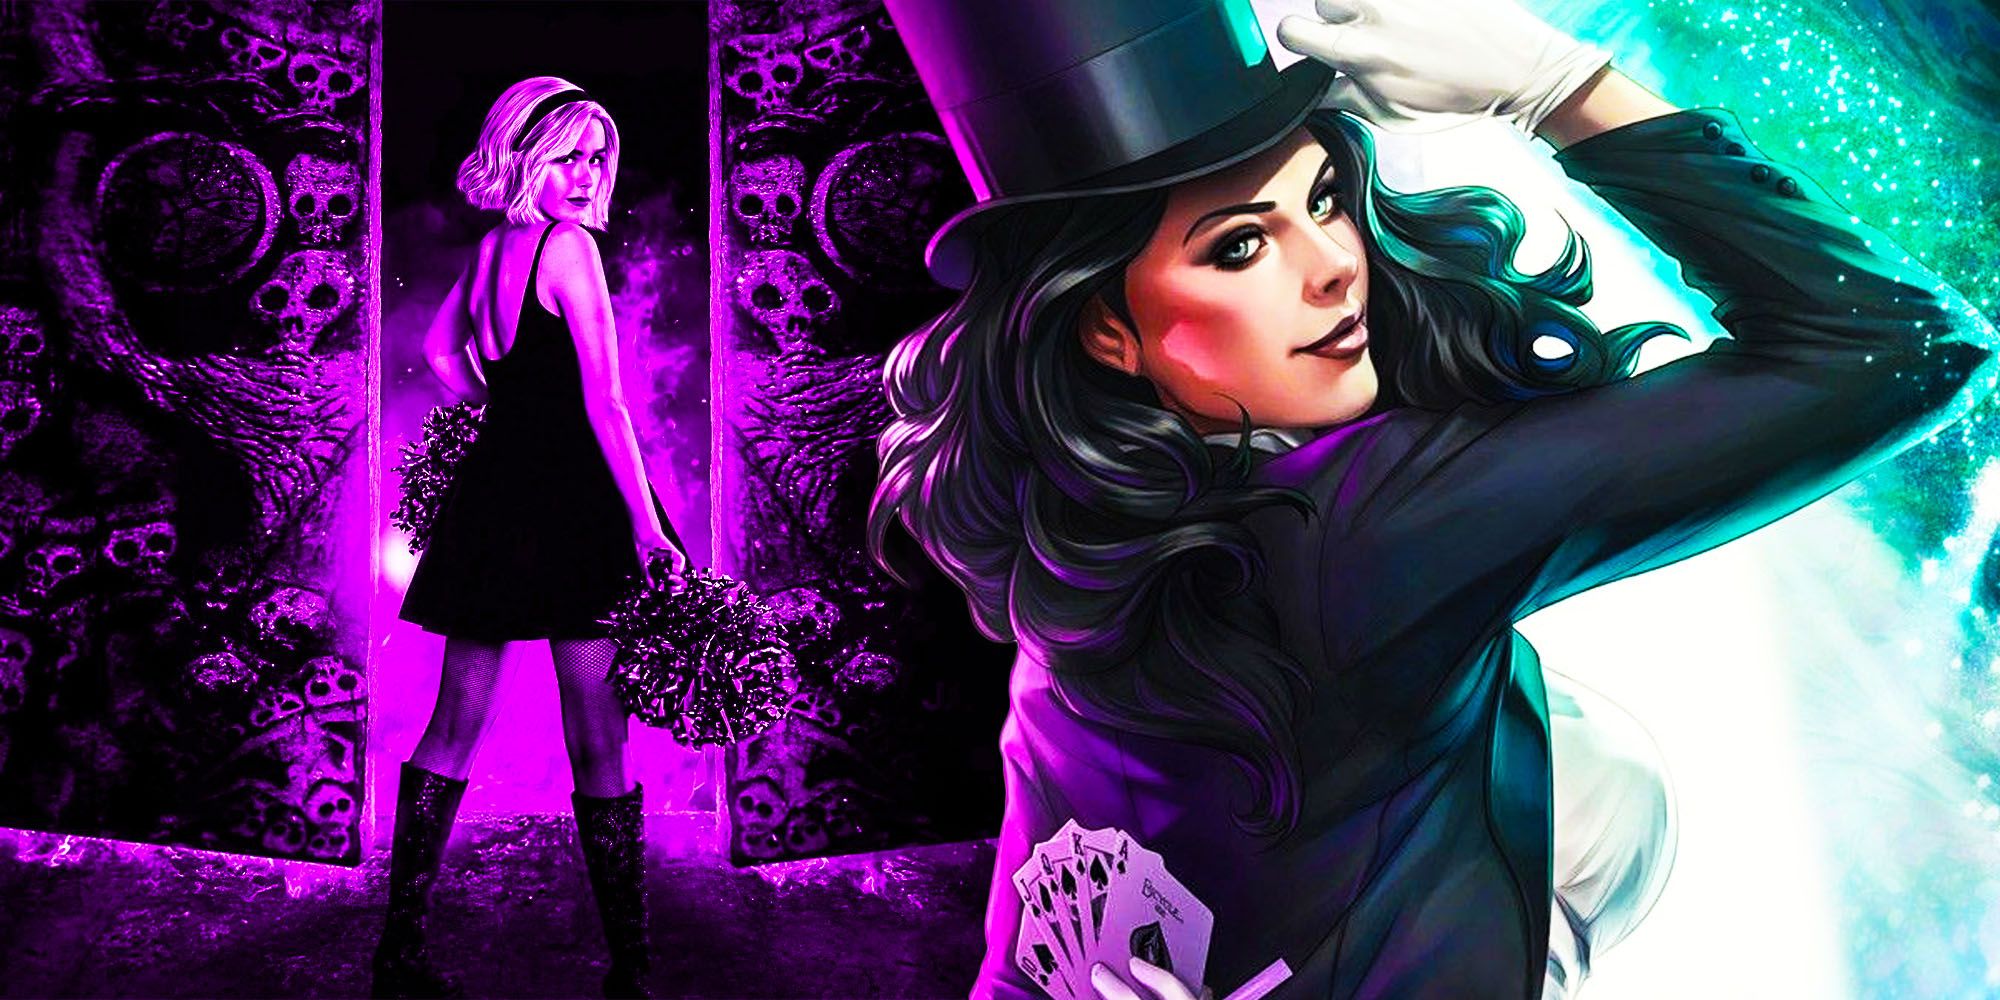 Zatanna can be the next chilling adventures of sabrina